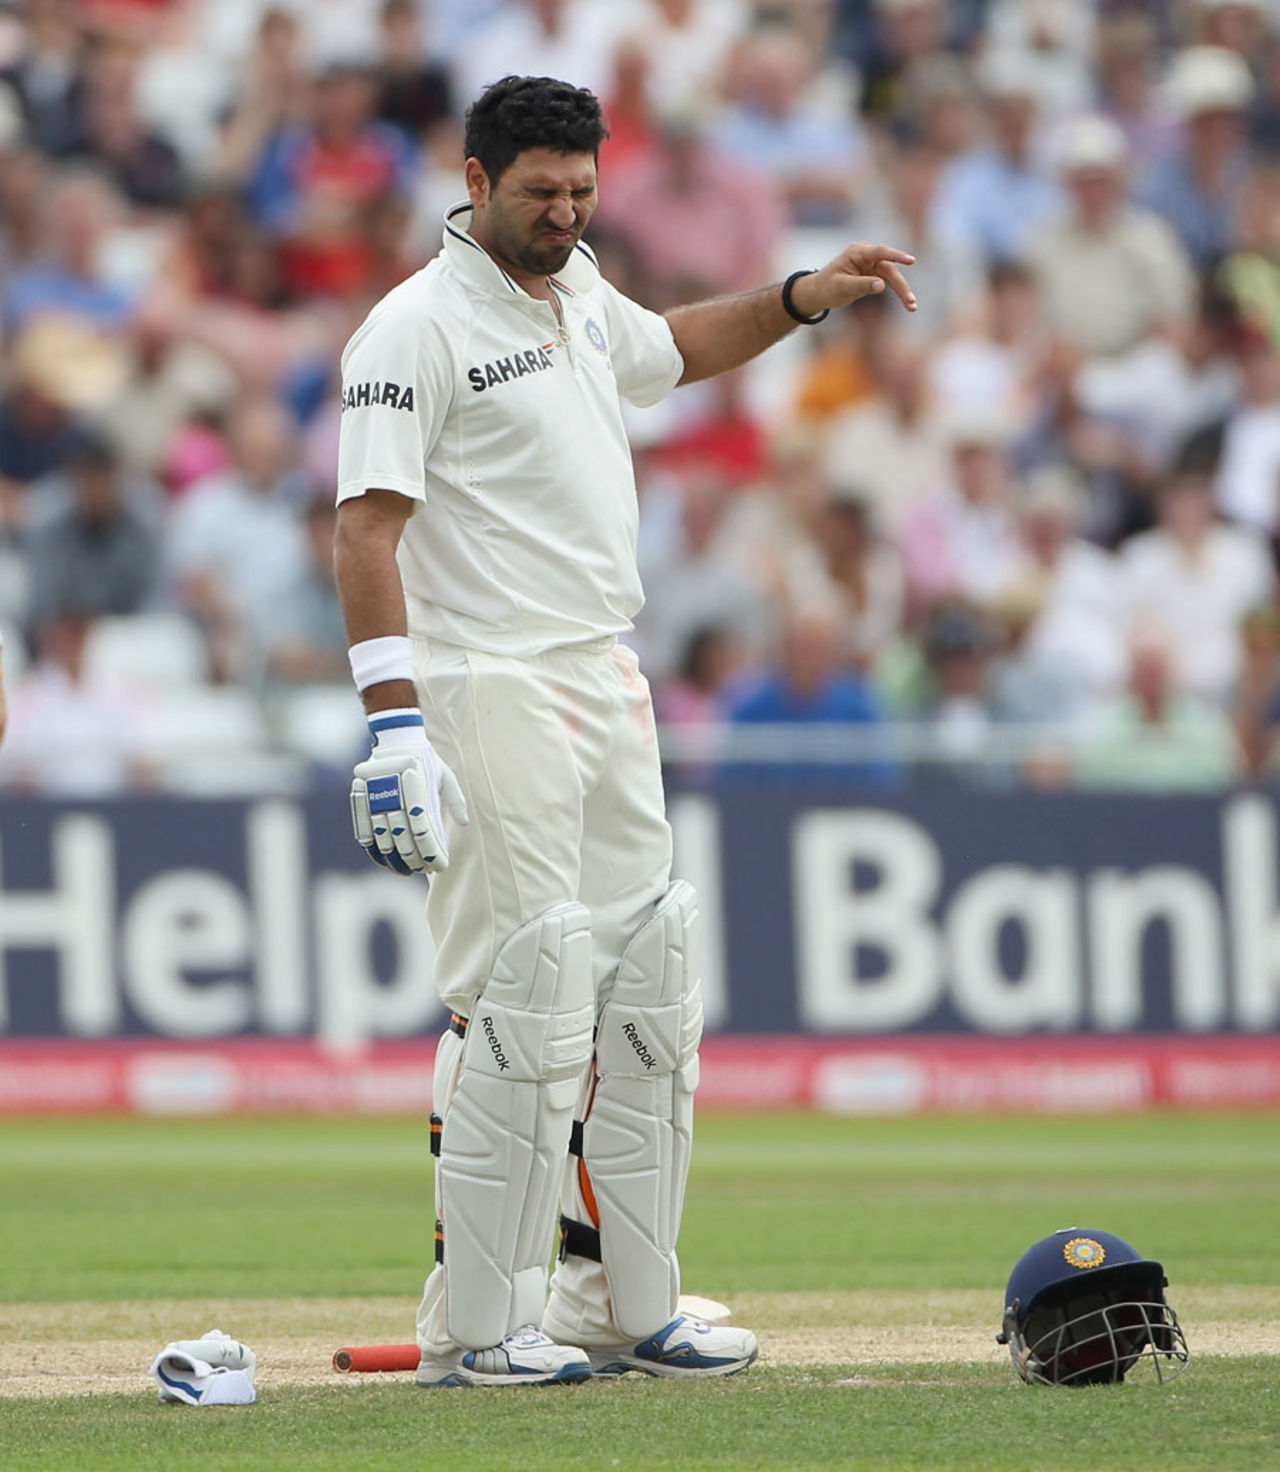 Yuvraj Singh winces after taking a stinging blow on the fingers, England v India, 2nd Test, Trent Bridge, 4th day, August 1, 2011